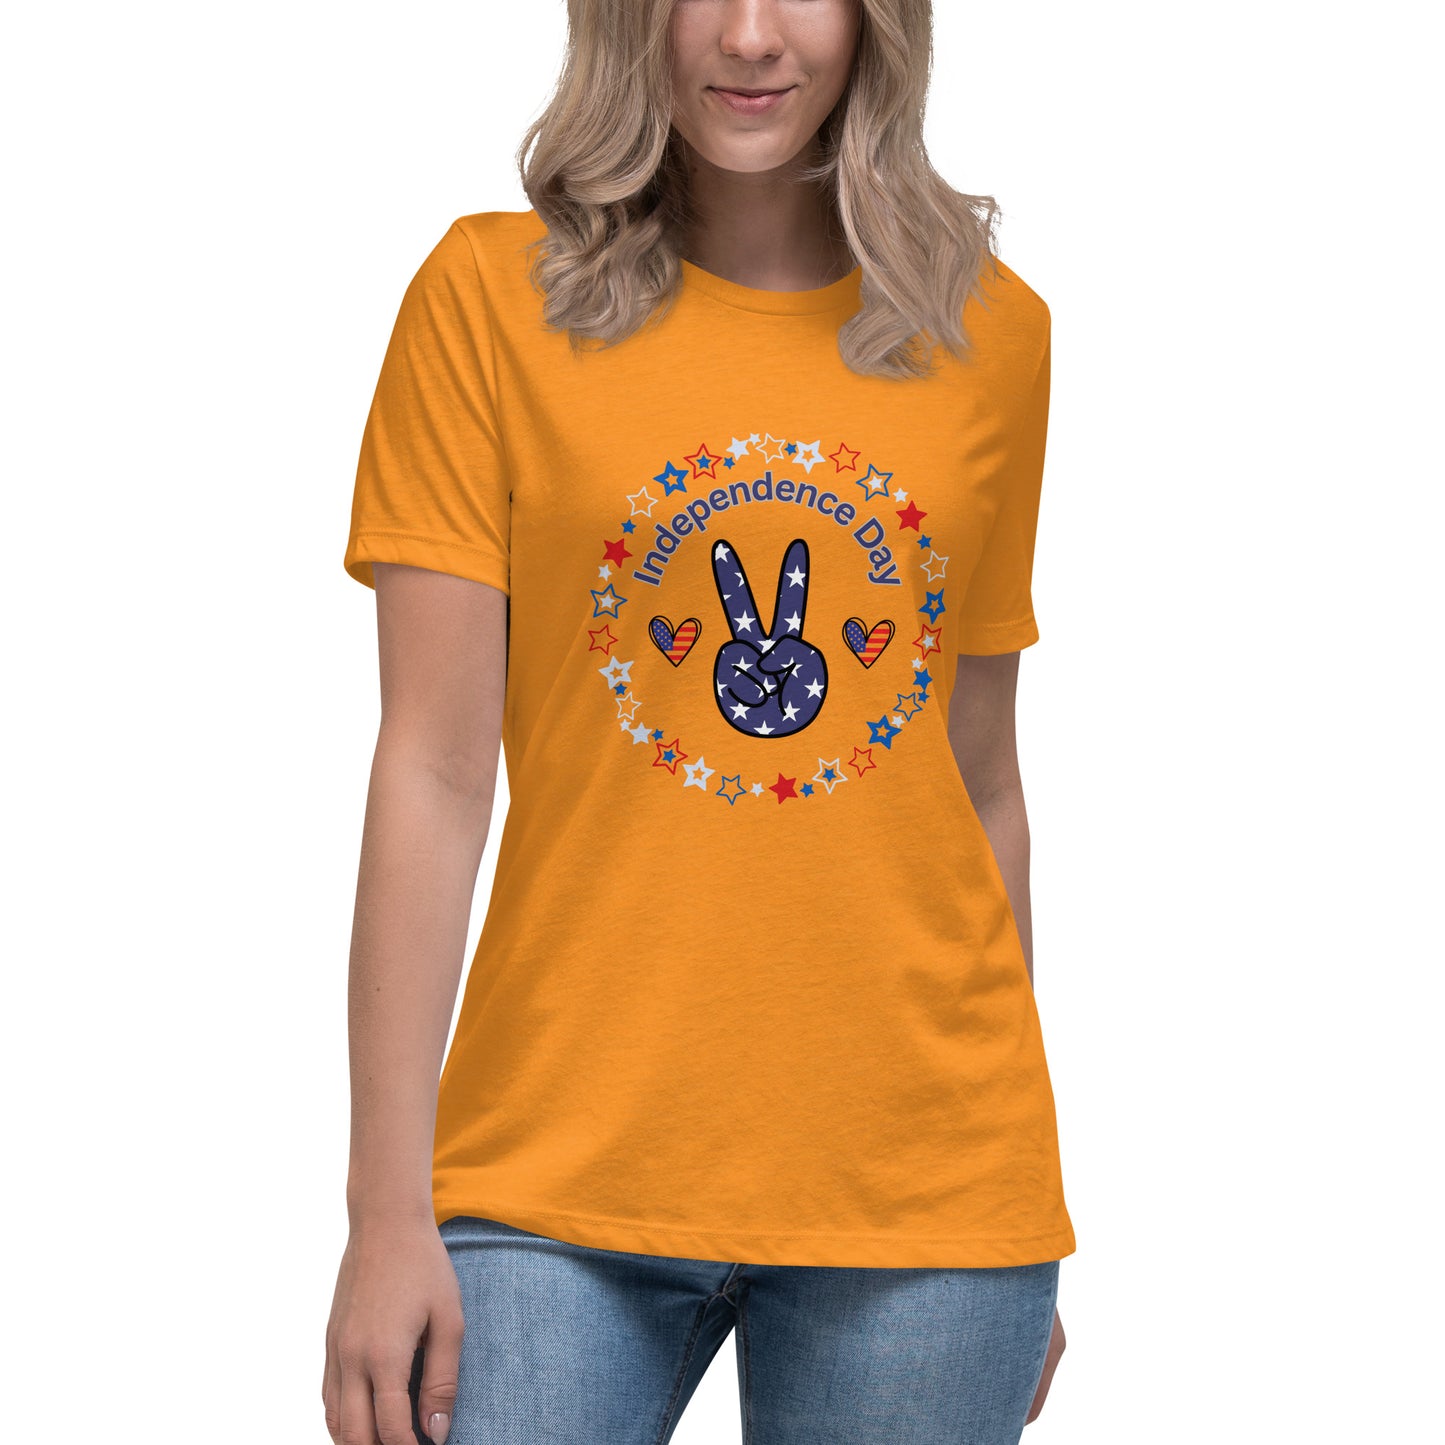 Women's Relaxed T-Shirt - Independence Day 4th of July T-shirt Stylin' Spirit Heather Marmalade S 